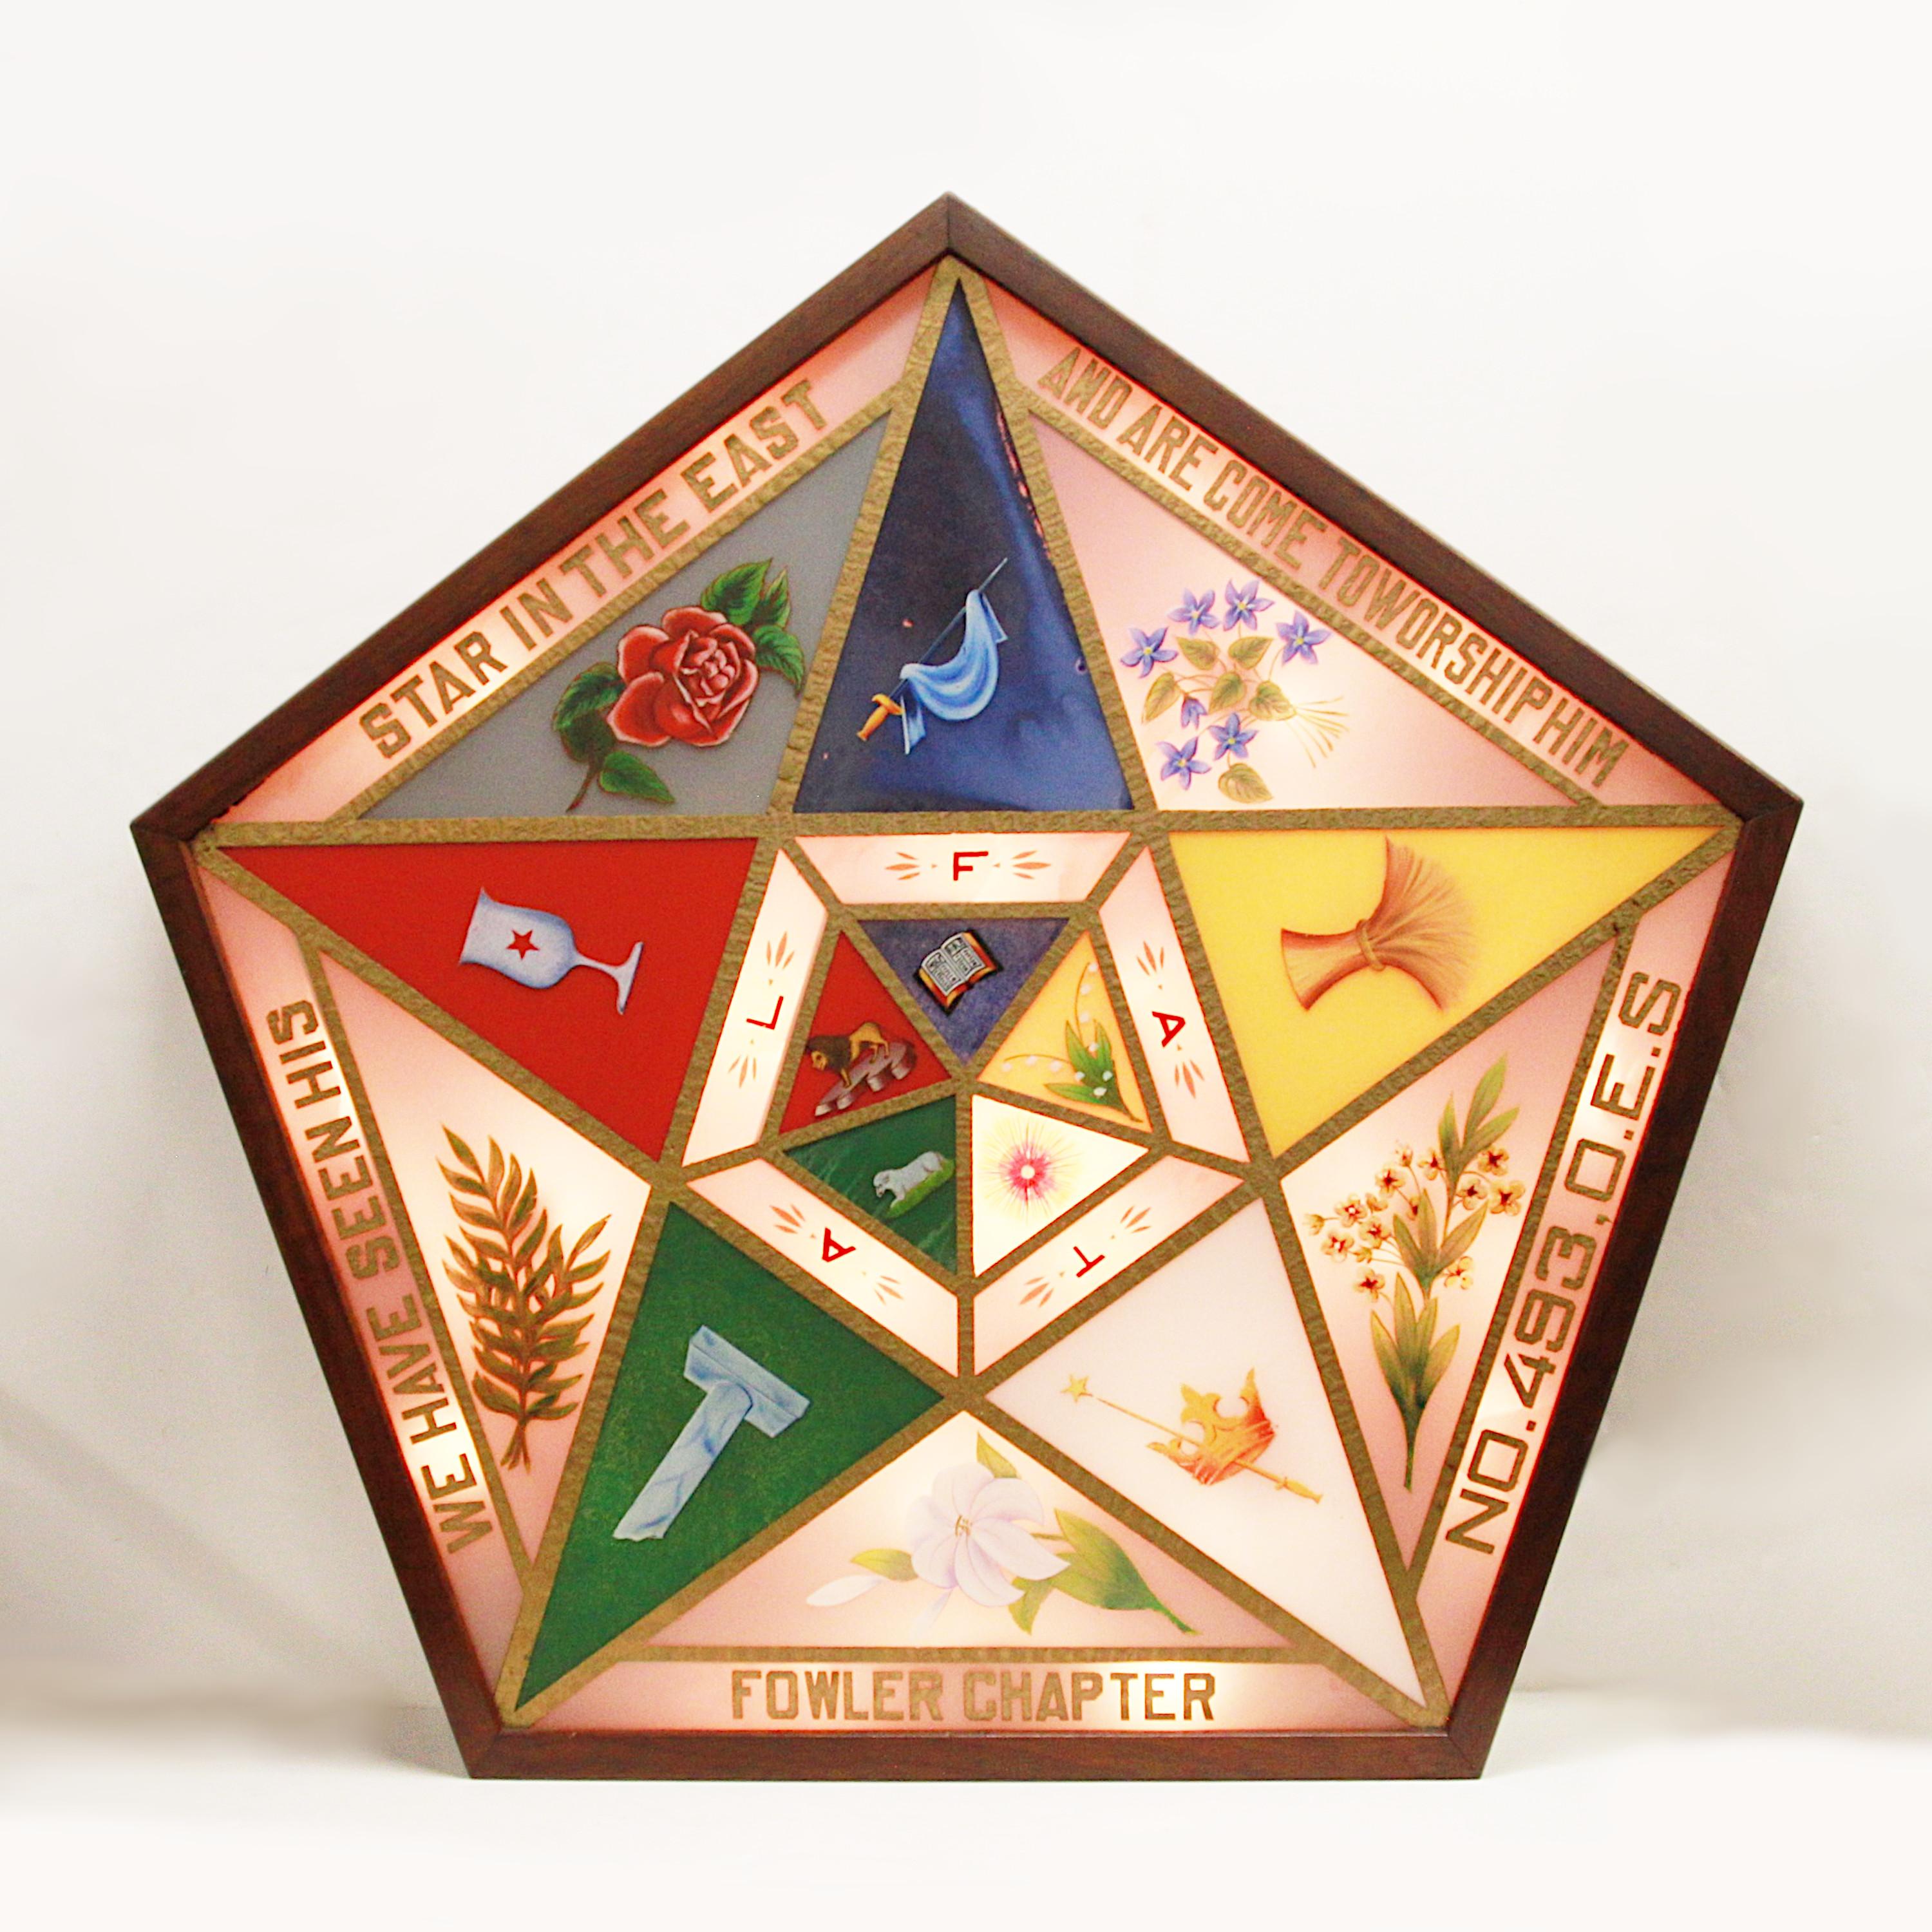 Mid-20th Century Rare Vintage 1930s Order of the Eastern Star Light-Up Masonic Lodge Signet Sign For Sale